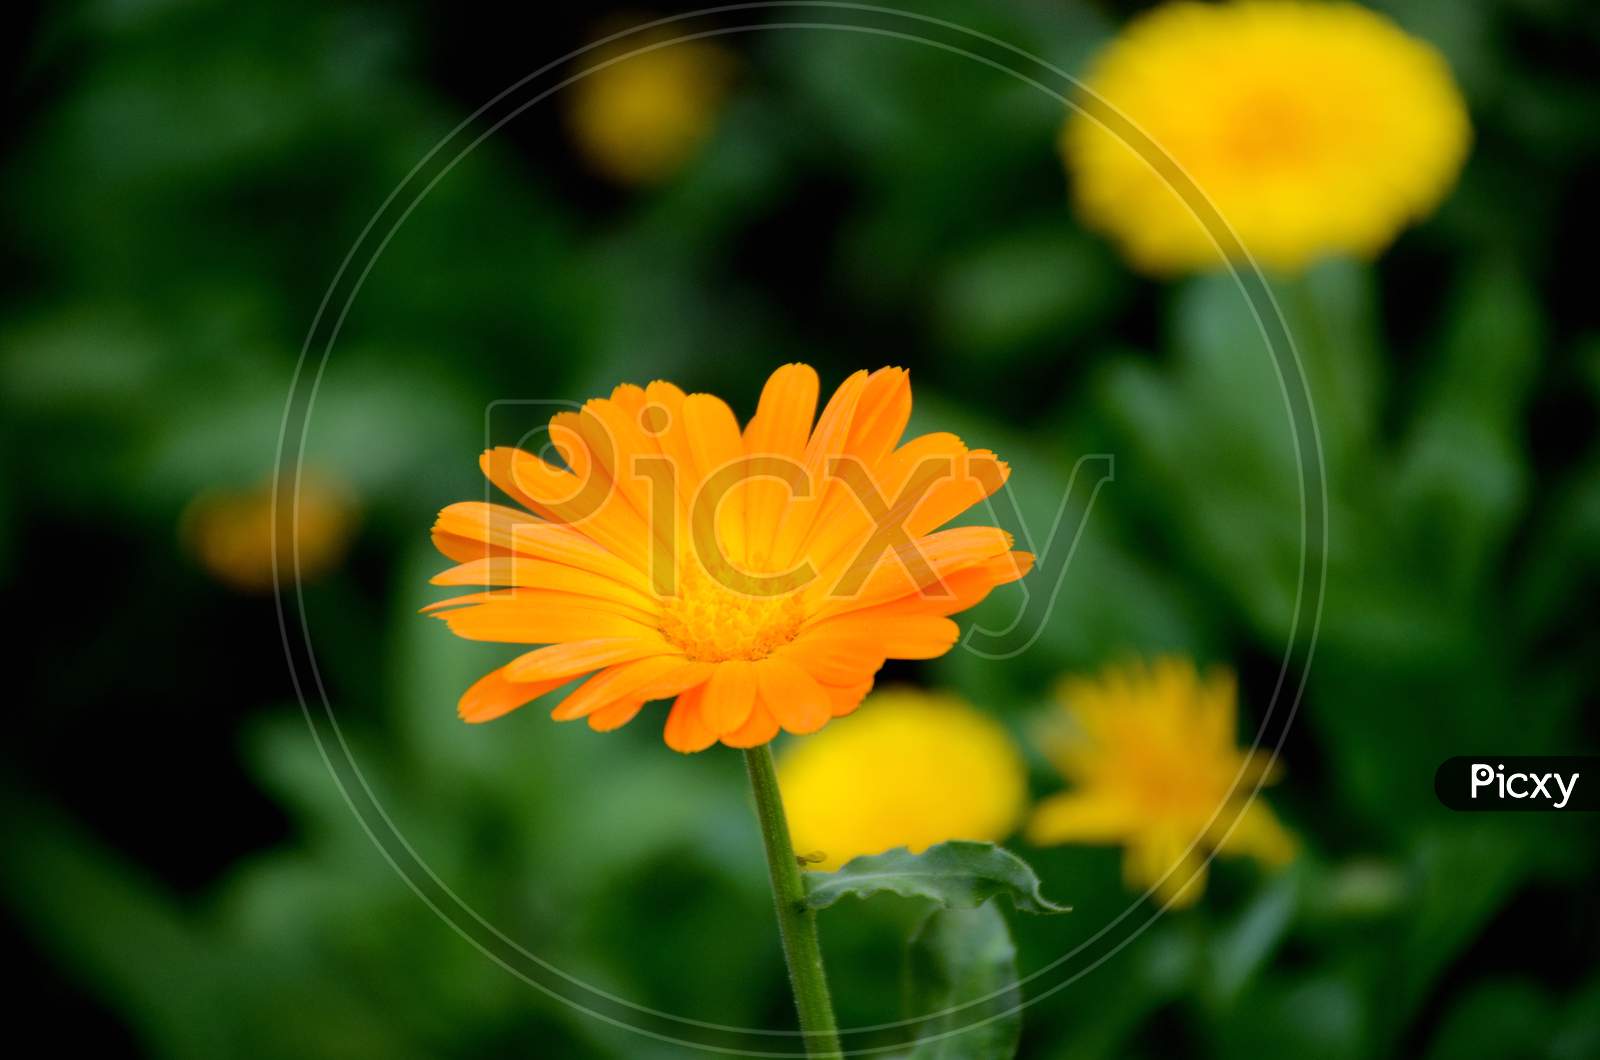 The Beautiful Calendula Orange Flower With Leaves And Plant In The Garden.